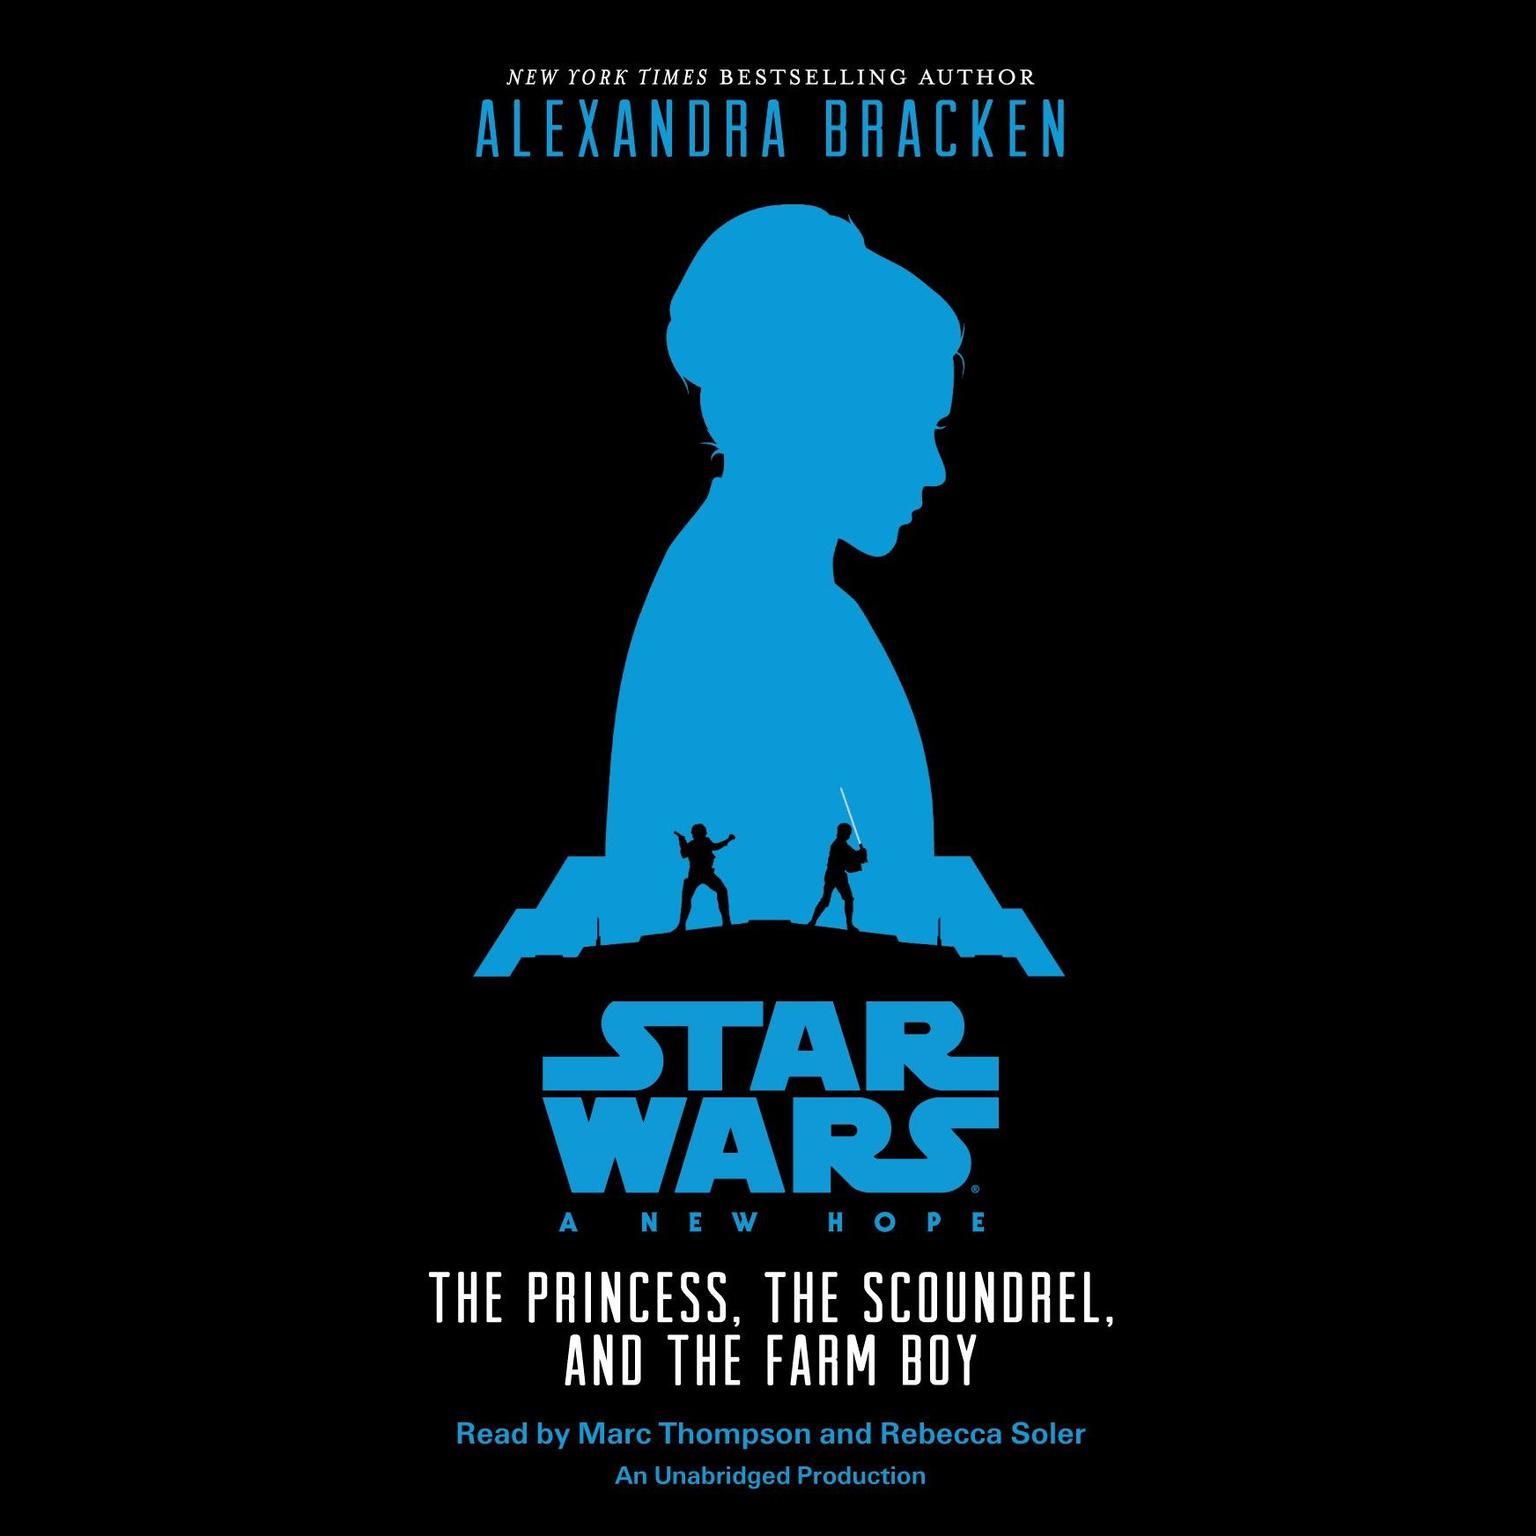 Star Wars: A New Hope The Princess, the Scoundrel, and the Farm Boy Audiobook, by Alexandra Bracken